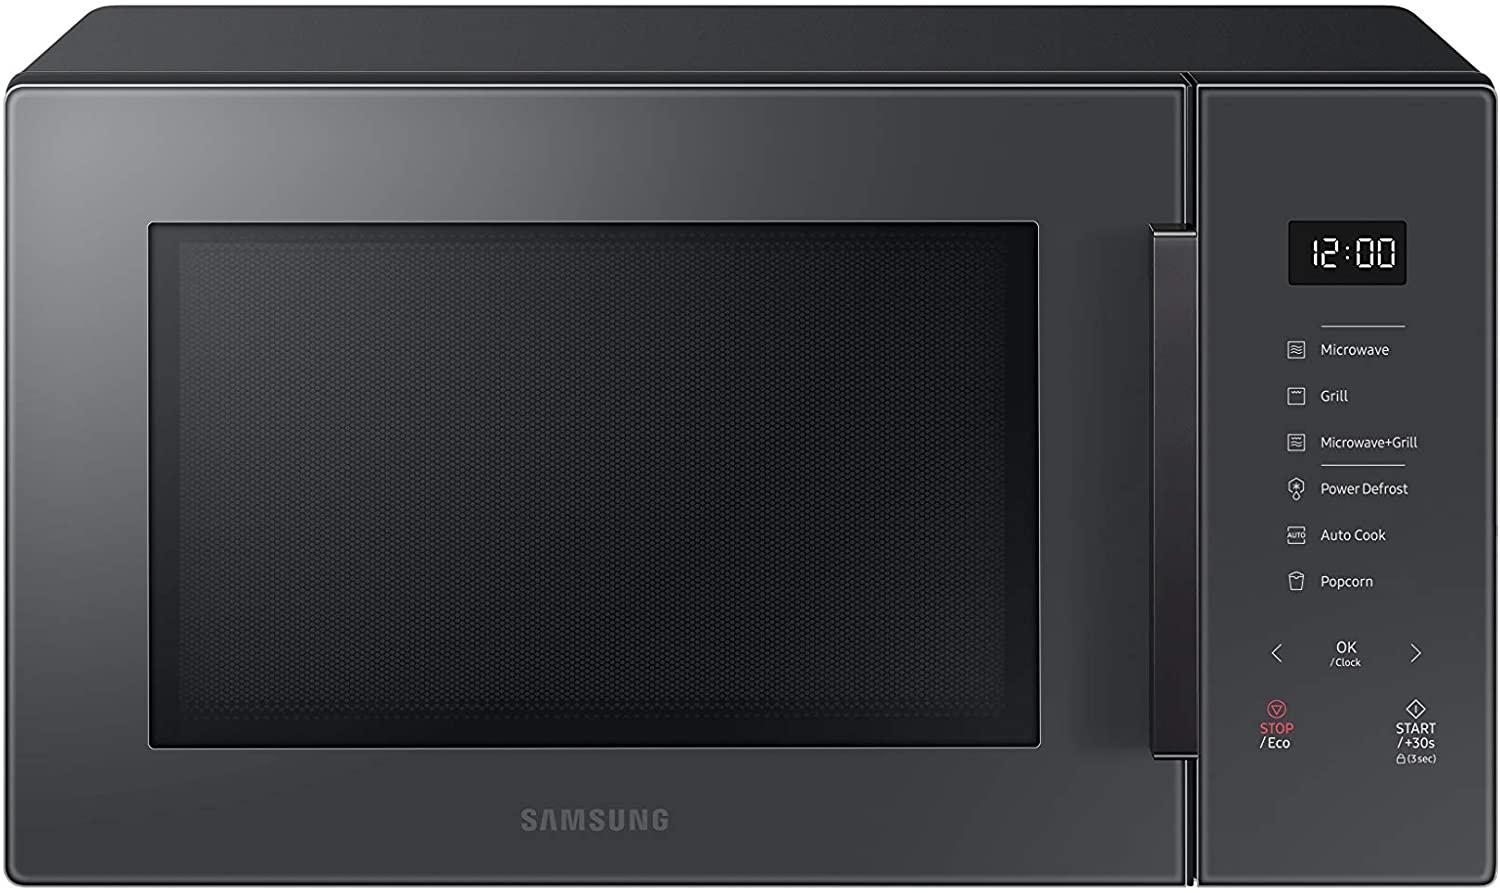 Samsung 1.1ft MG11T5018CC Countertop Oven for $129.99 Shipped